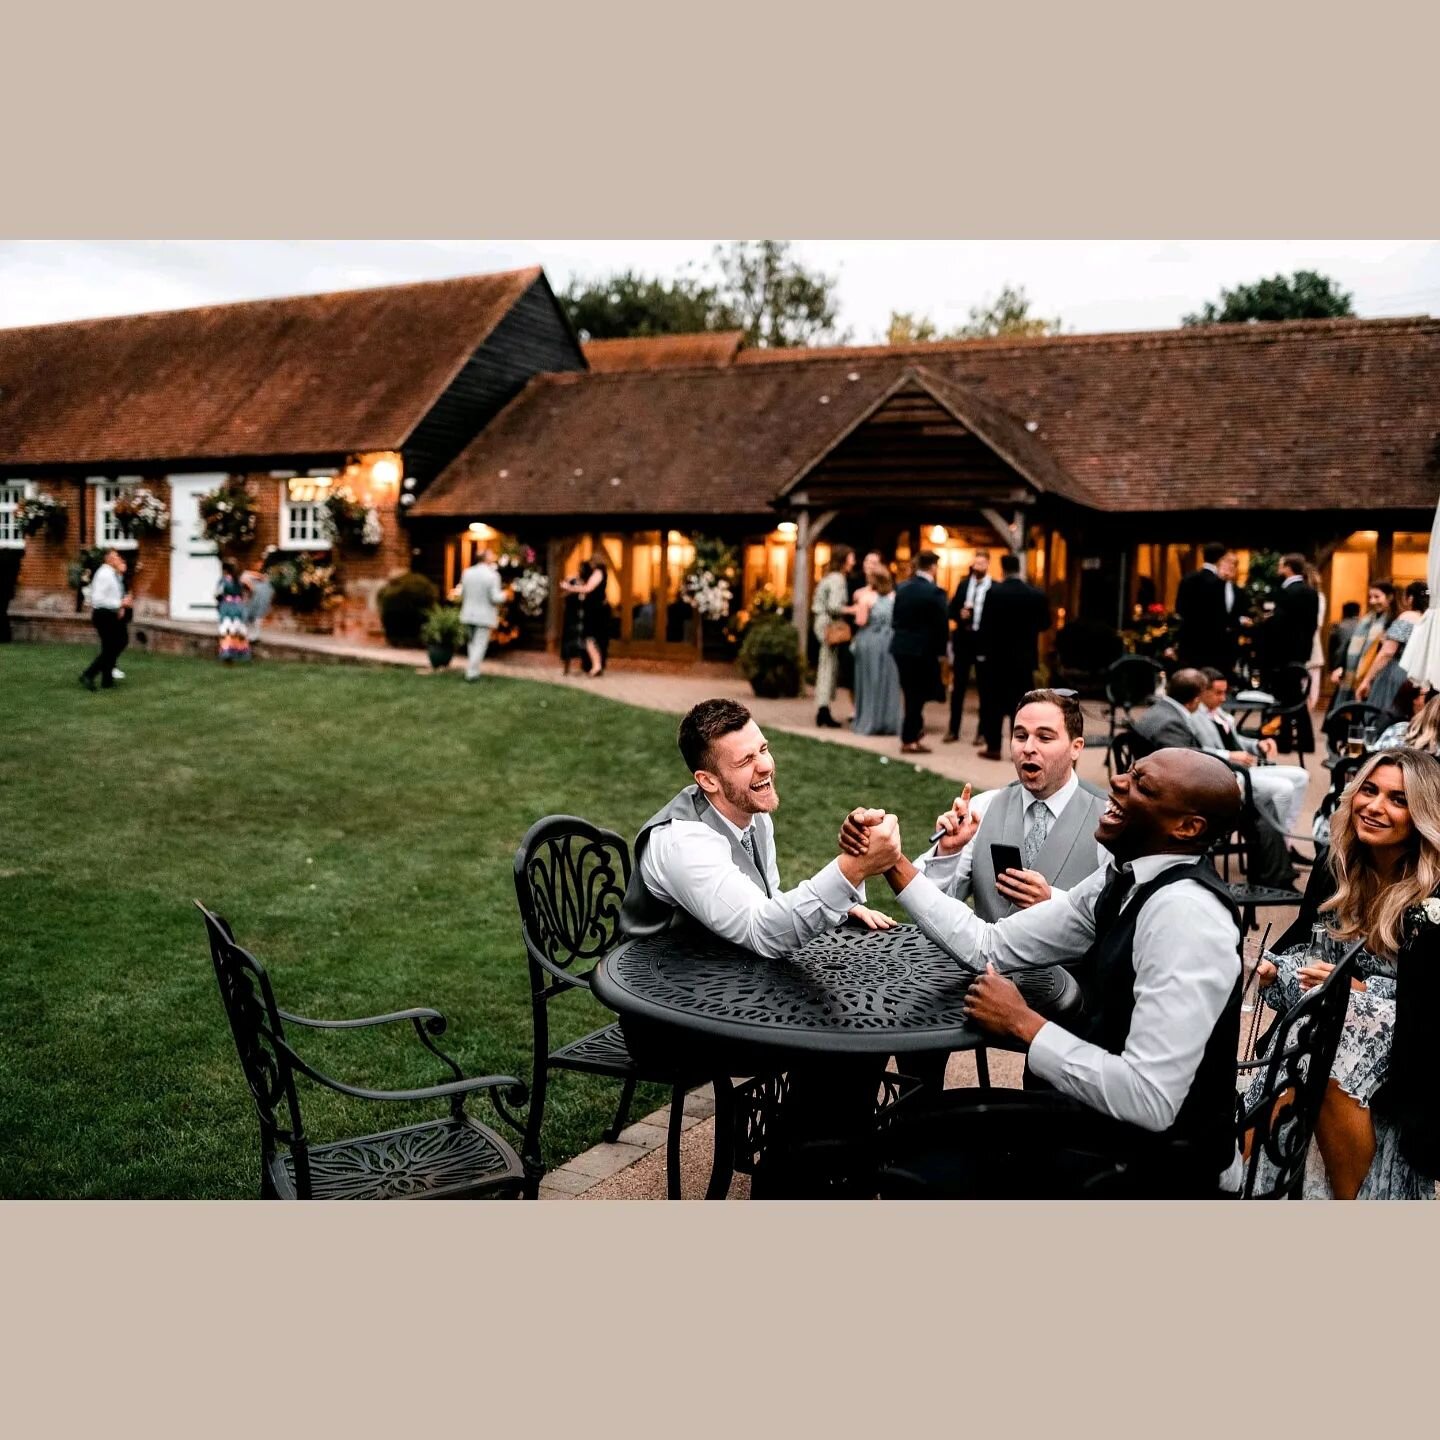 Weddings are all about  good times and having fun.

@coolingcastlebarn